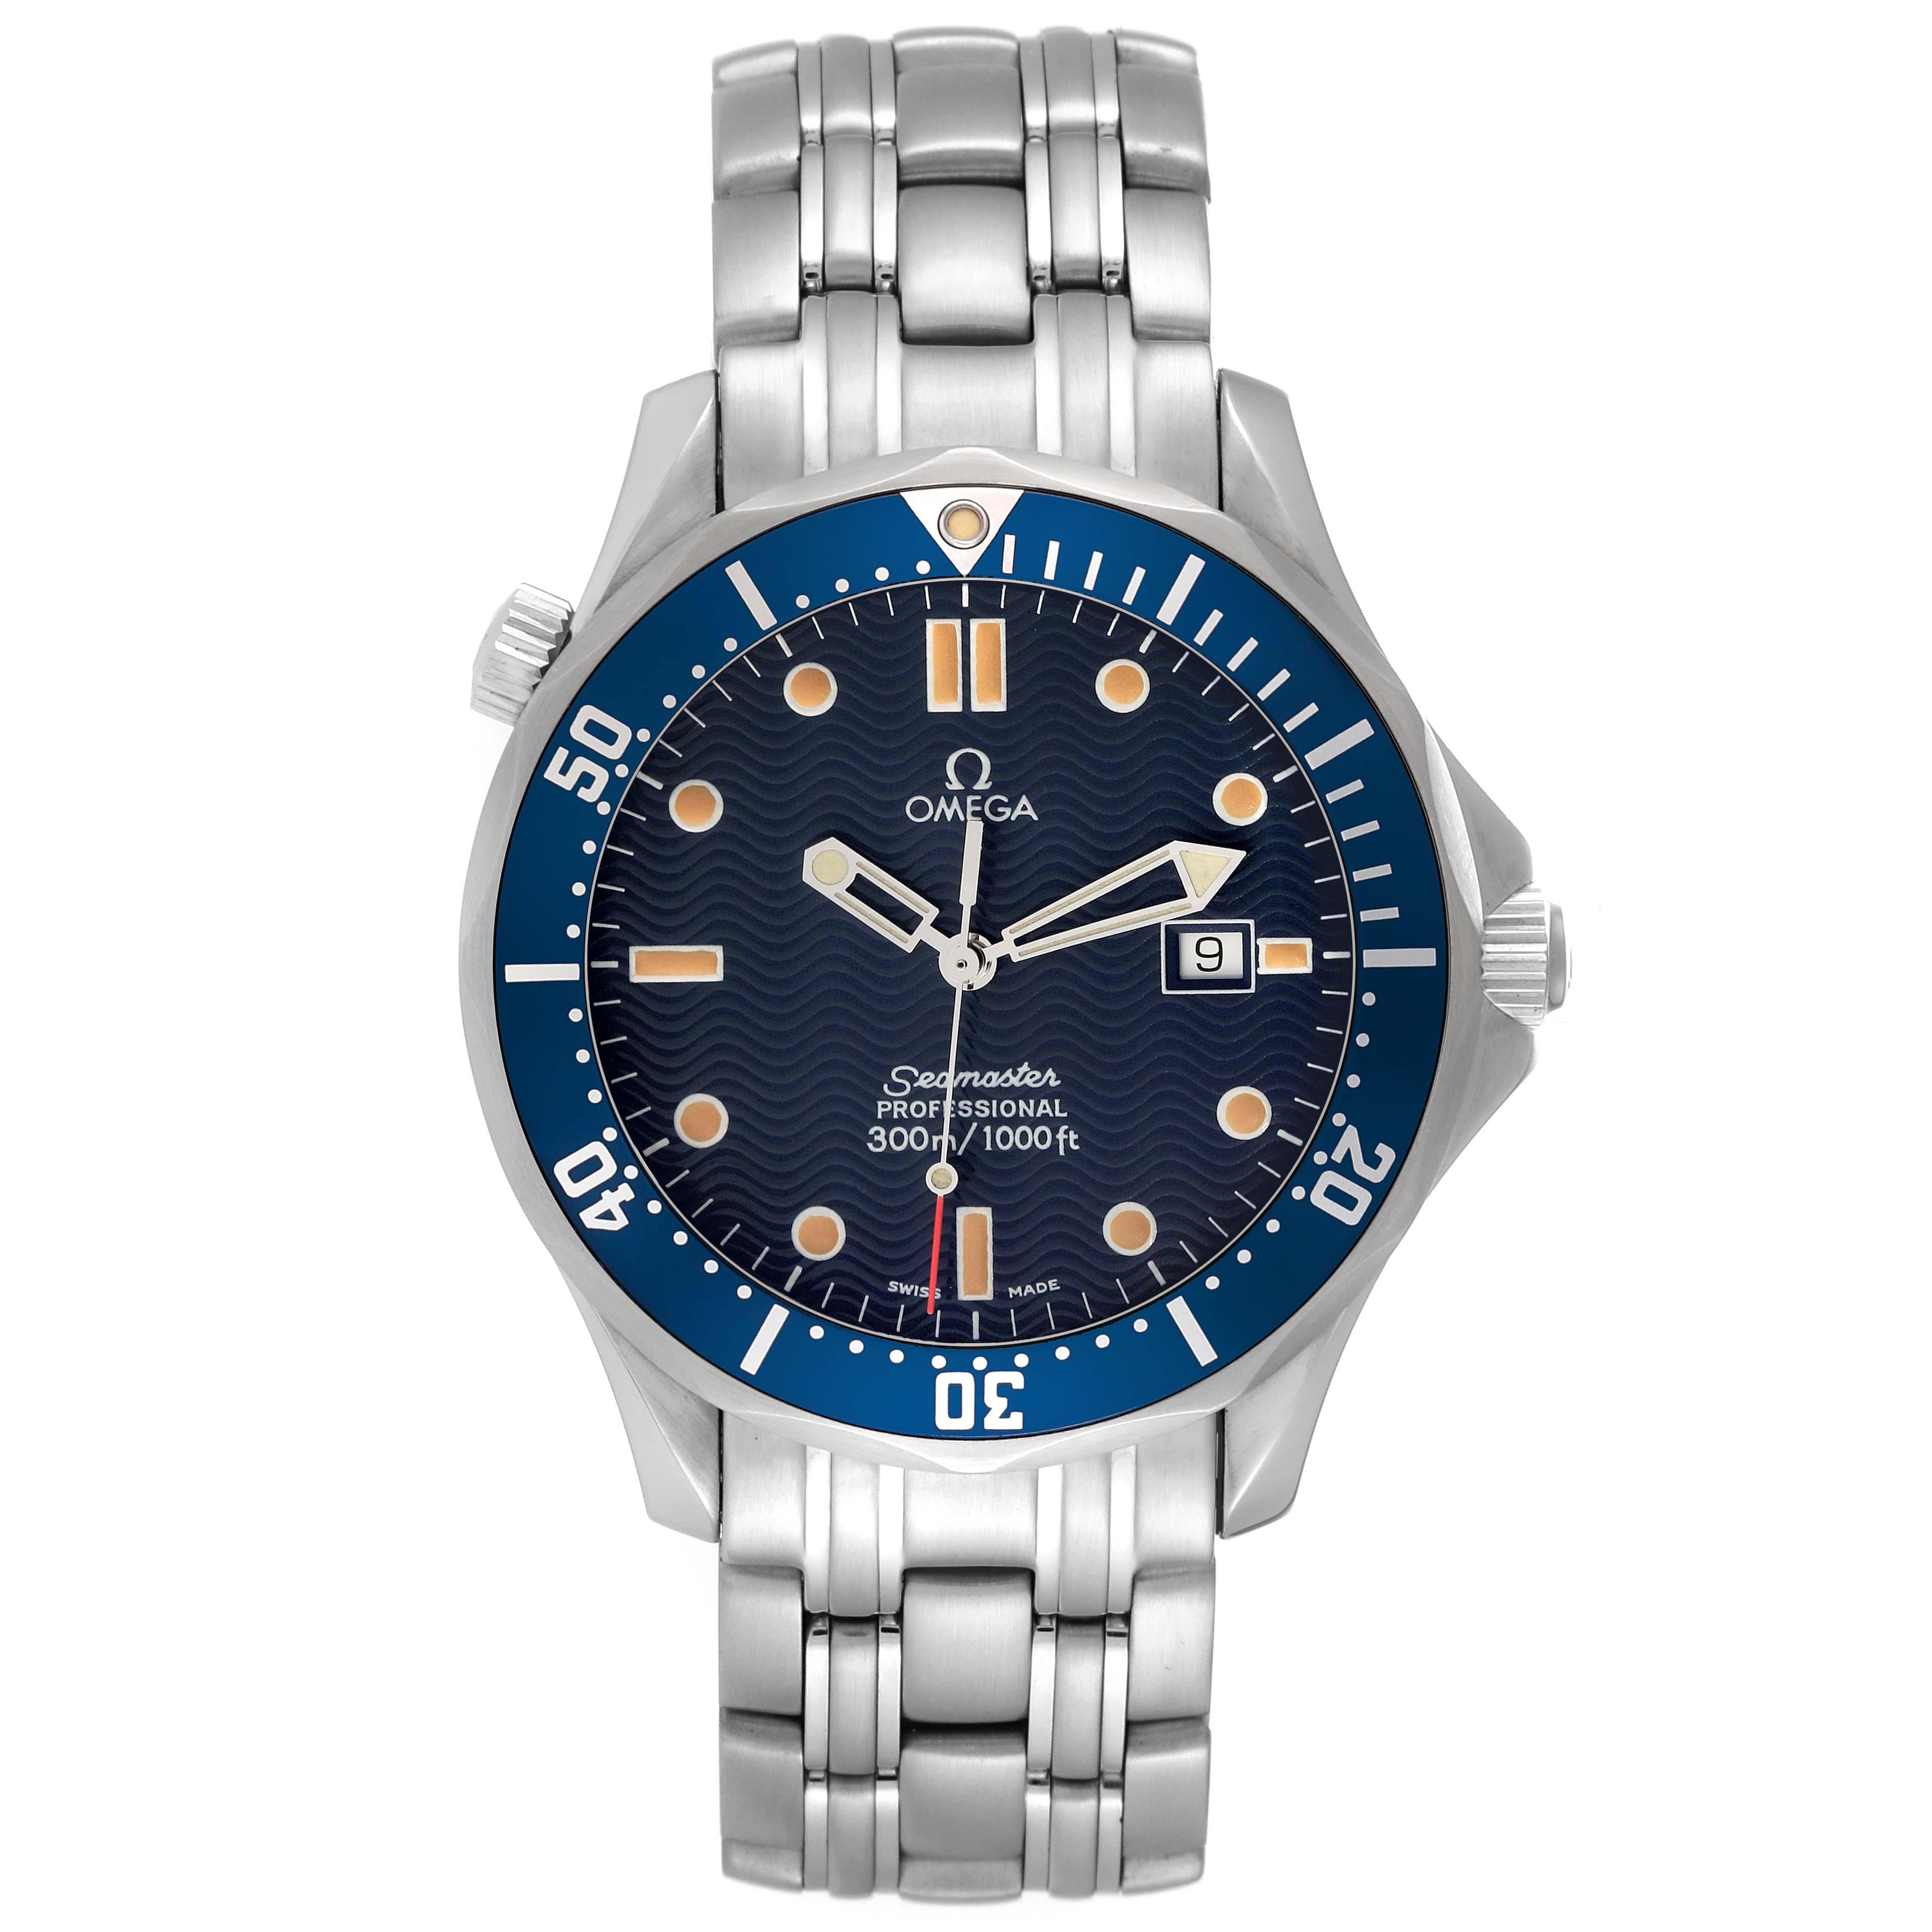 Omega Seamaster Diver James Bond Steel Mens Watch 2541.80.00 Card. Quartz movement. Stainless steel case 41 mm in diameter. Omega logo on the crown. Helium escape valve at 10 o'clock. Blue unidirectional rotating bezel. Scratch resistant sapphire